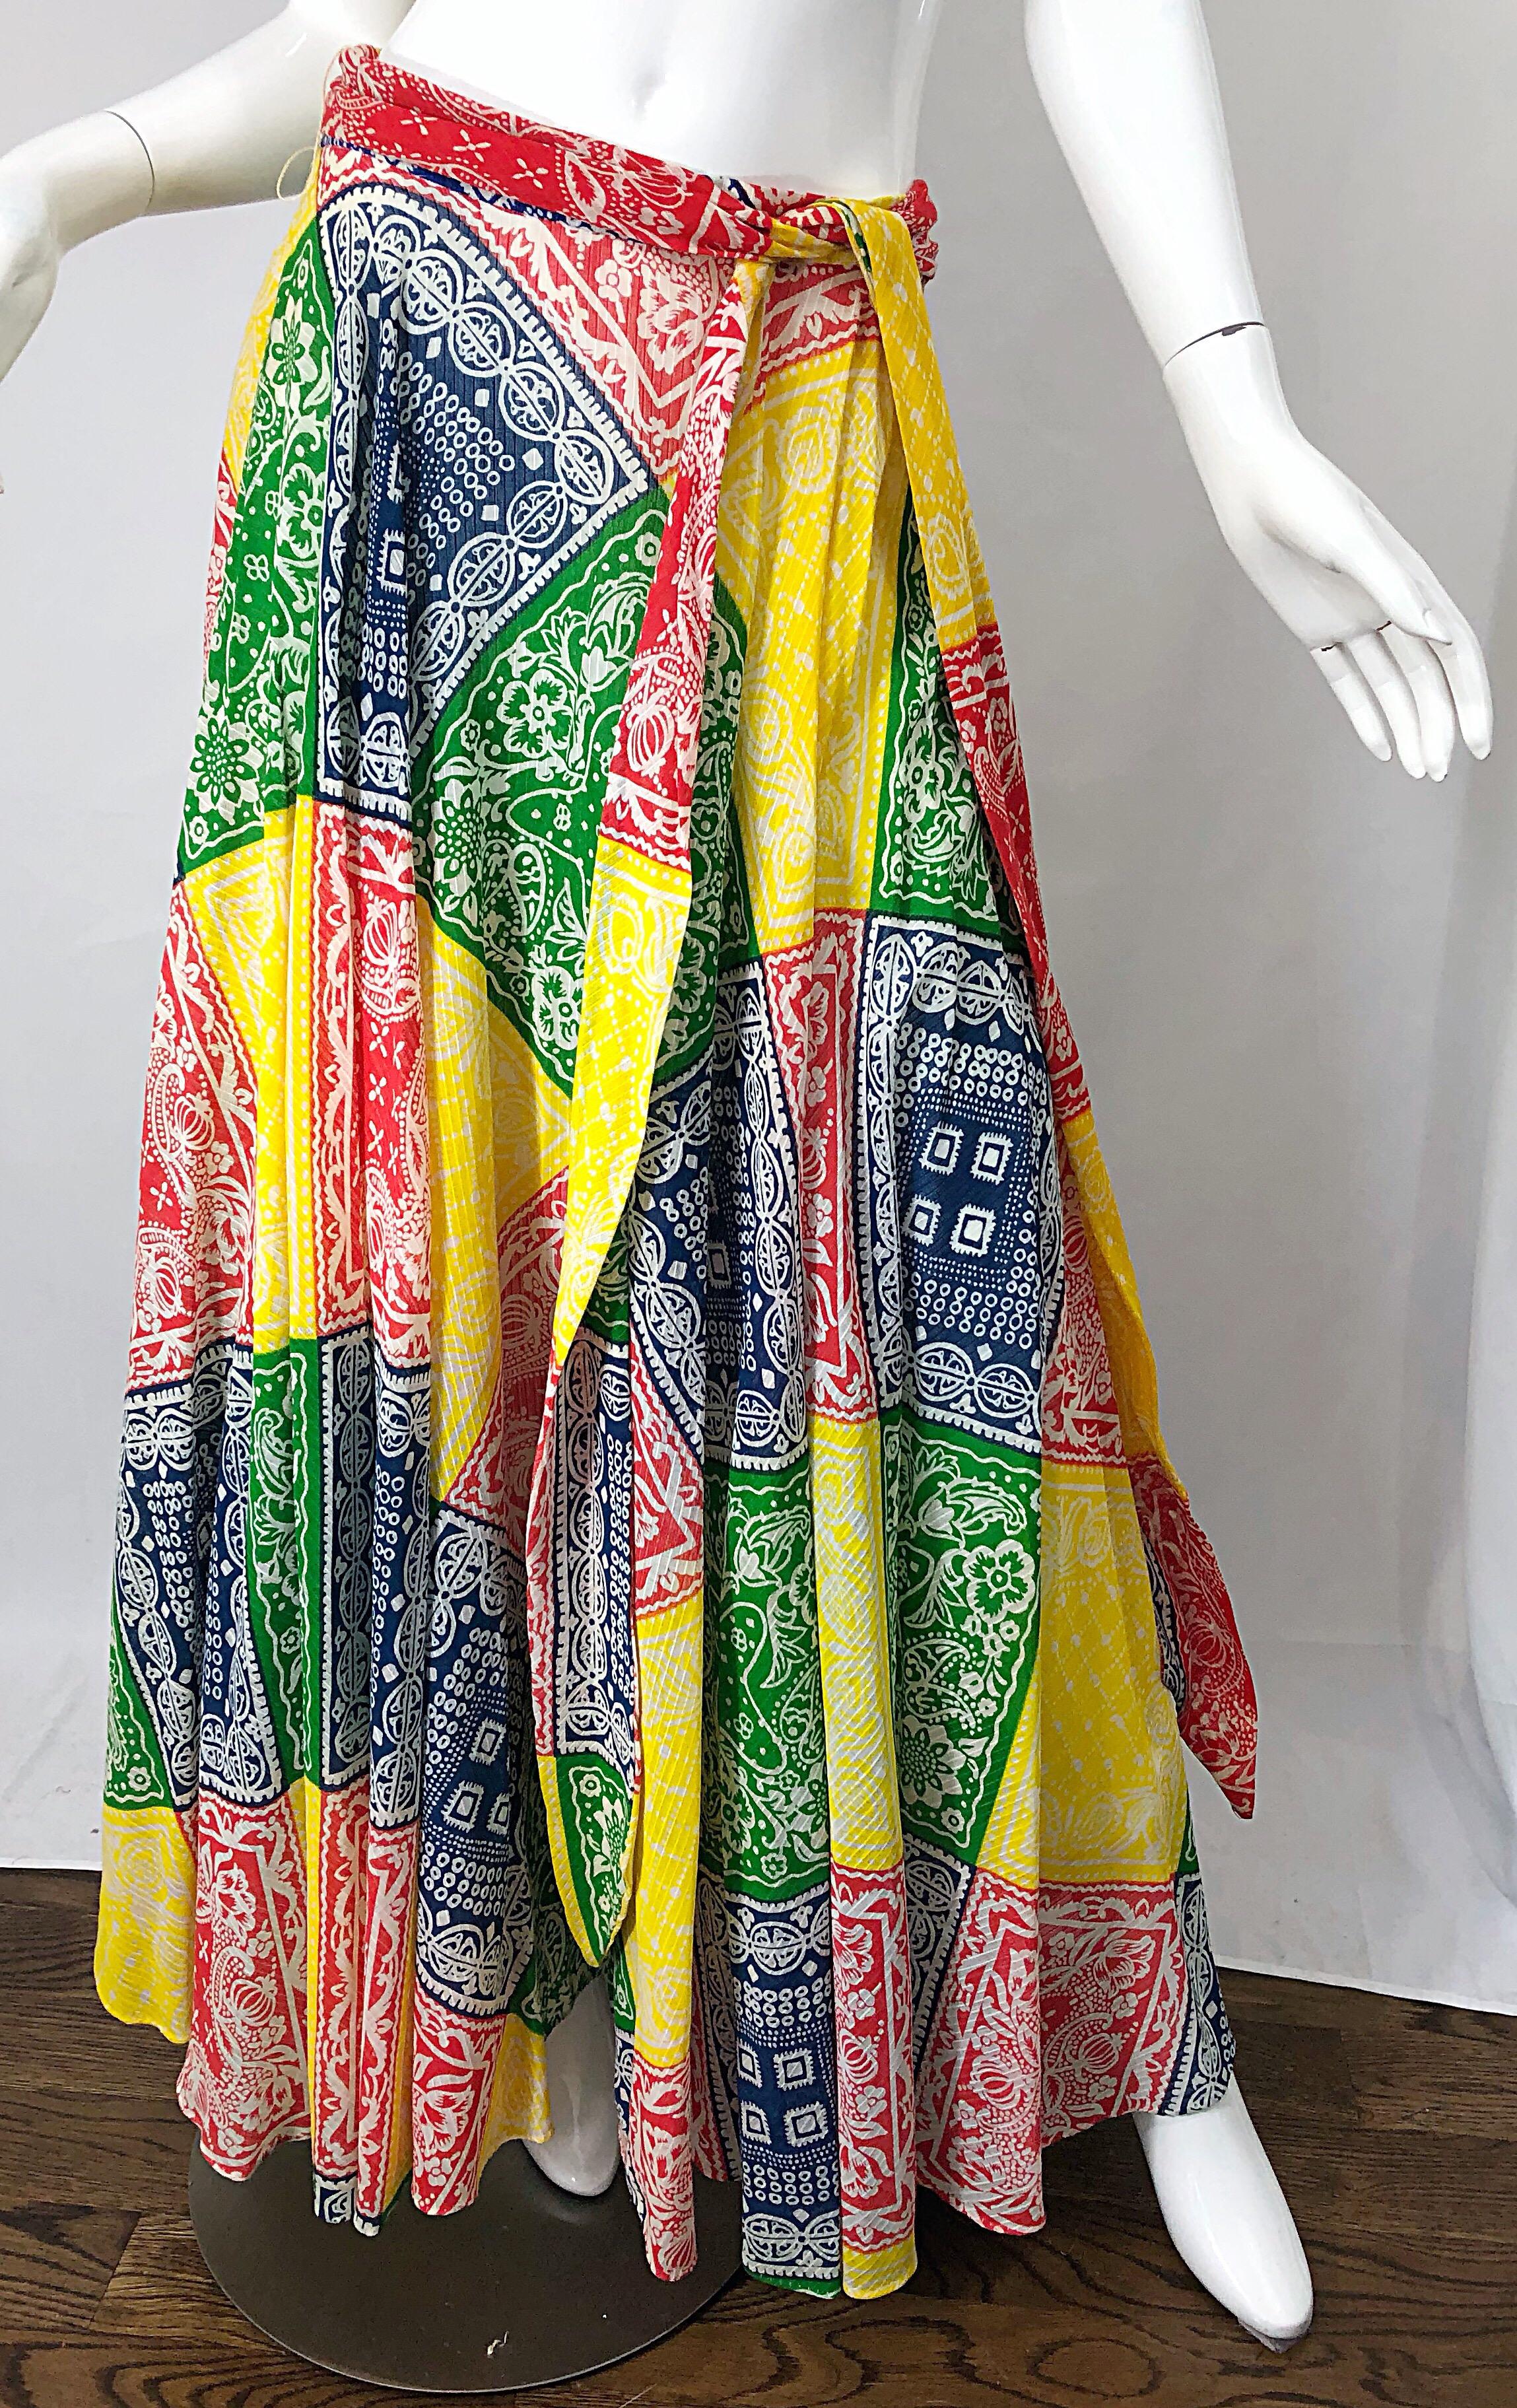 Boho chic! 1970s JOSEPH MAGNIN multicolor bandana print cotton maxi skirt and sash belt! Features vibrant colors of red, blue, green, yellow and white throughout. Hidden metal zipper up the side with hook-and-eye closure. Detachable sash waist belt.